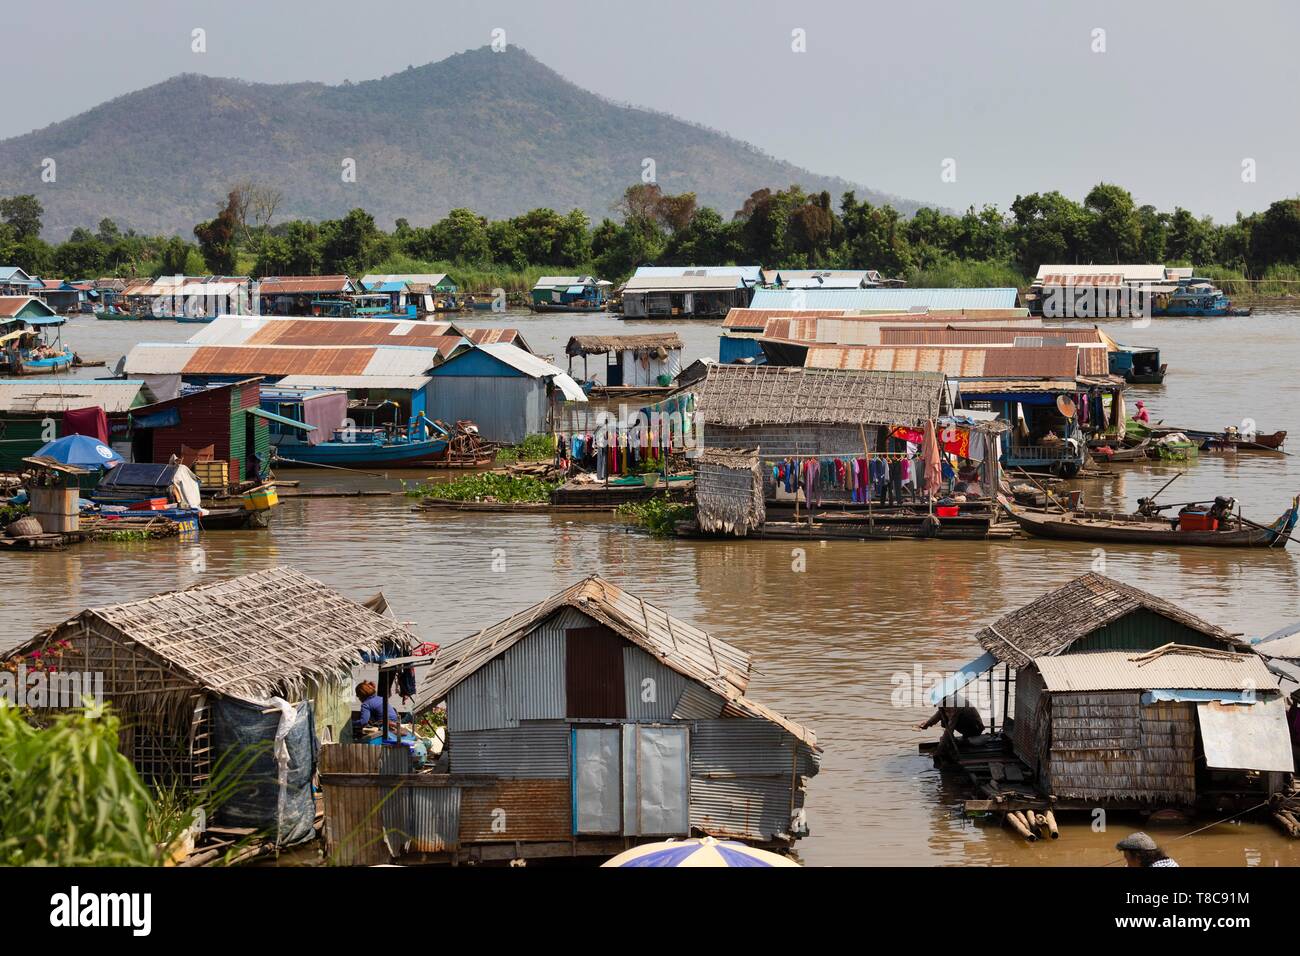 Floating villages with stilt houses, fishing village, boats at the Tonle Sap river, Kampong Chhnang, Cambodia Stock Photo